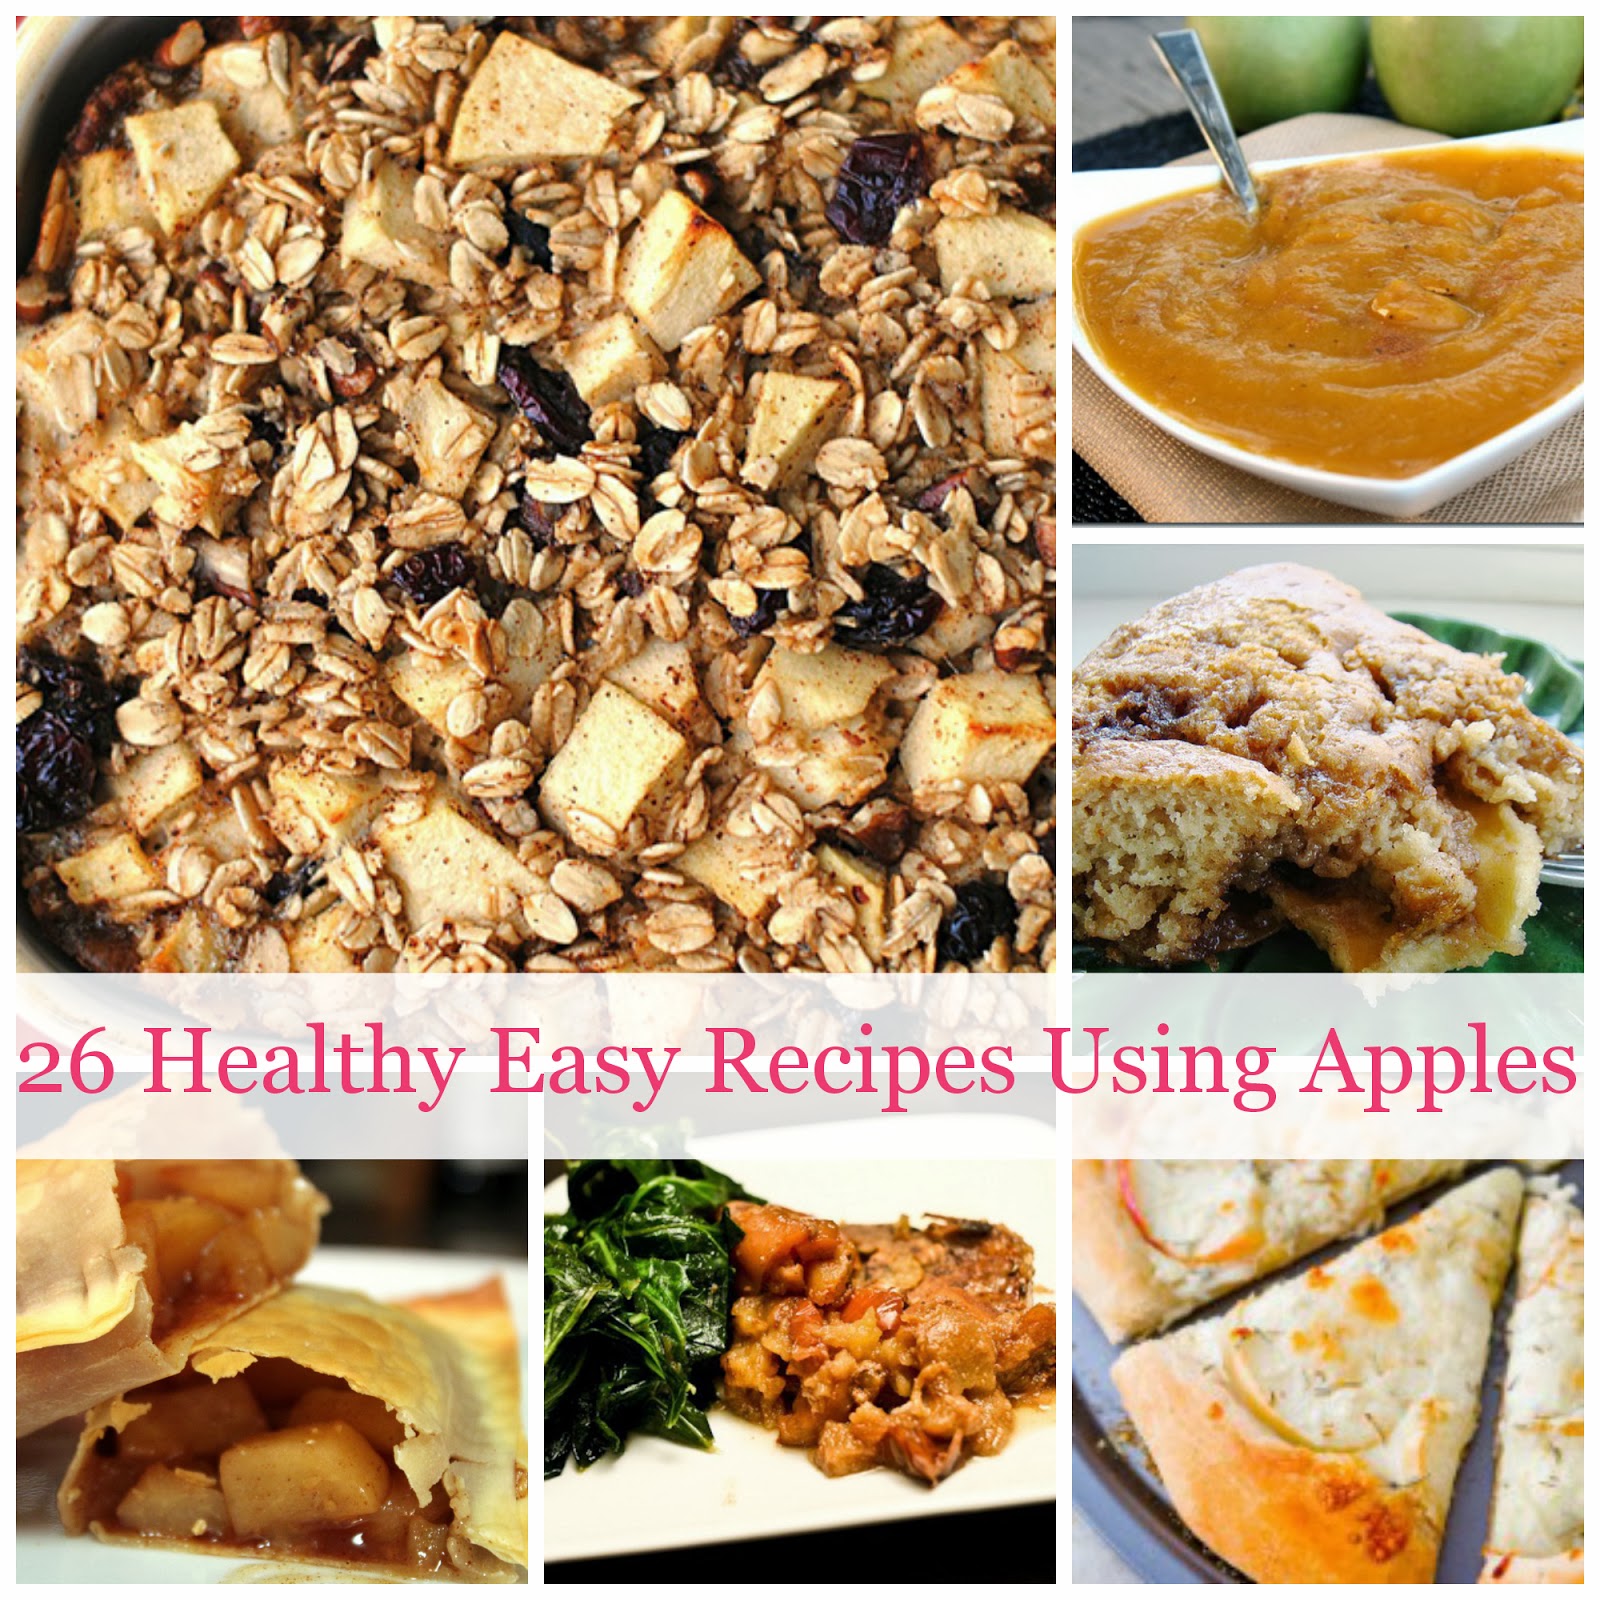 26 Healthy Easy Recipes Using Apples